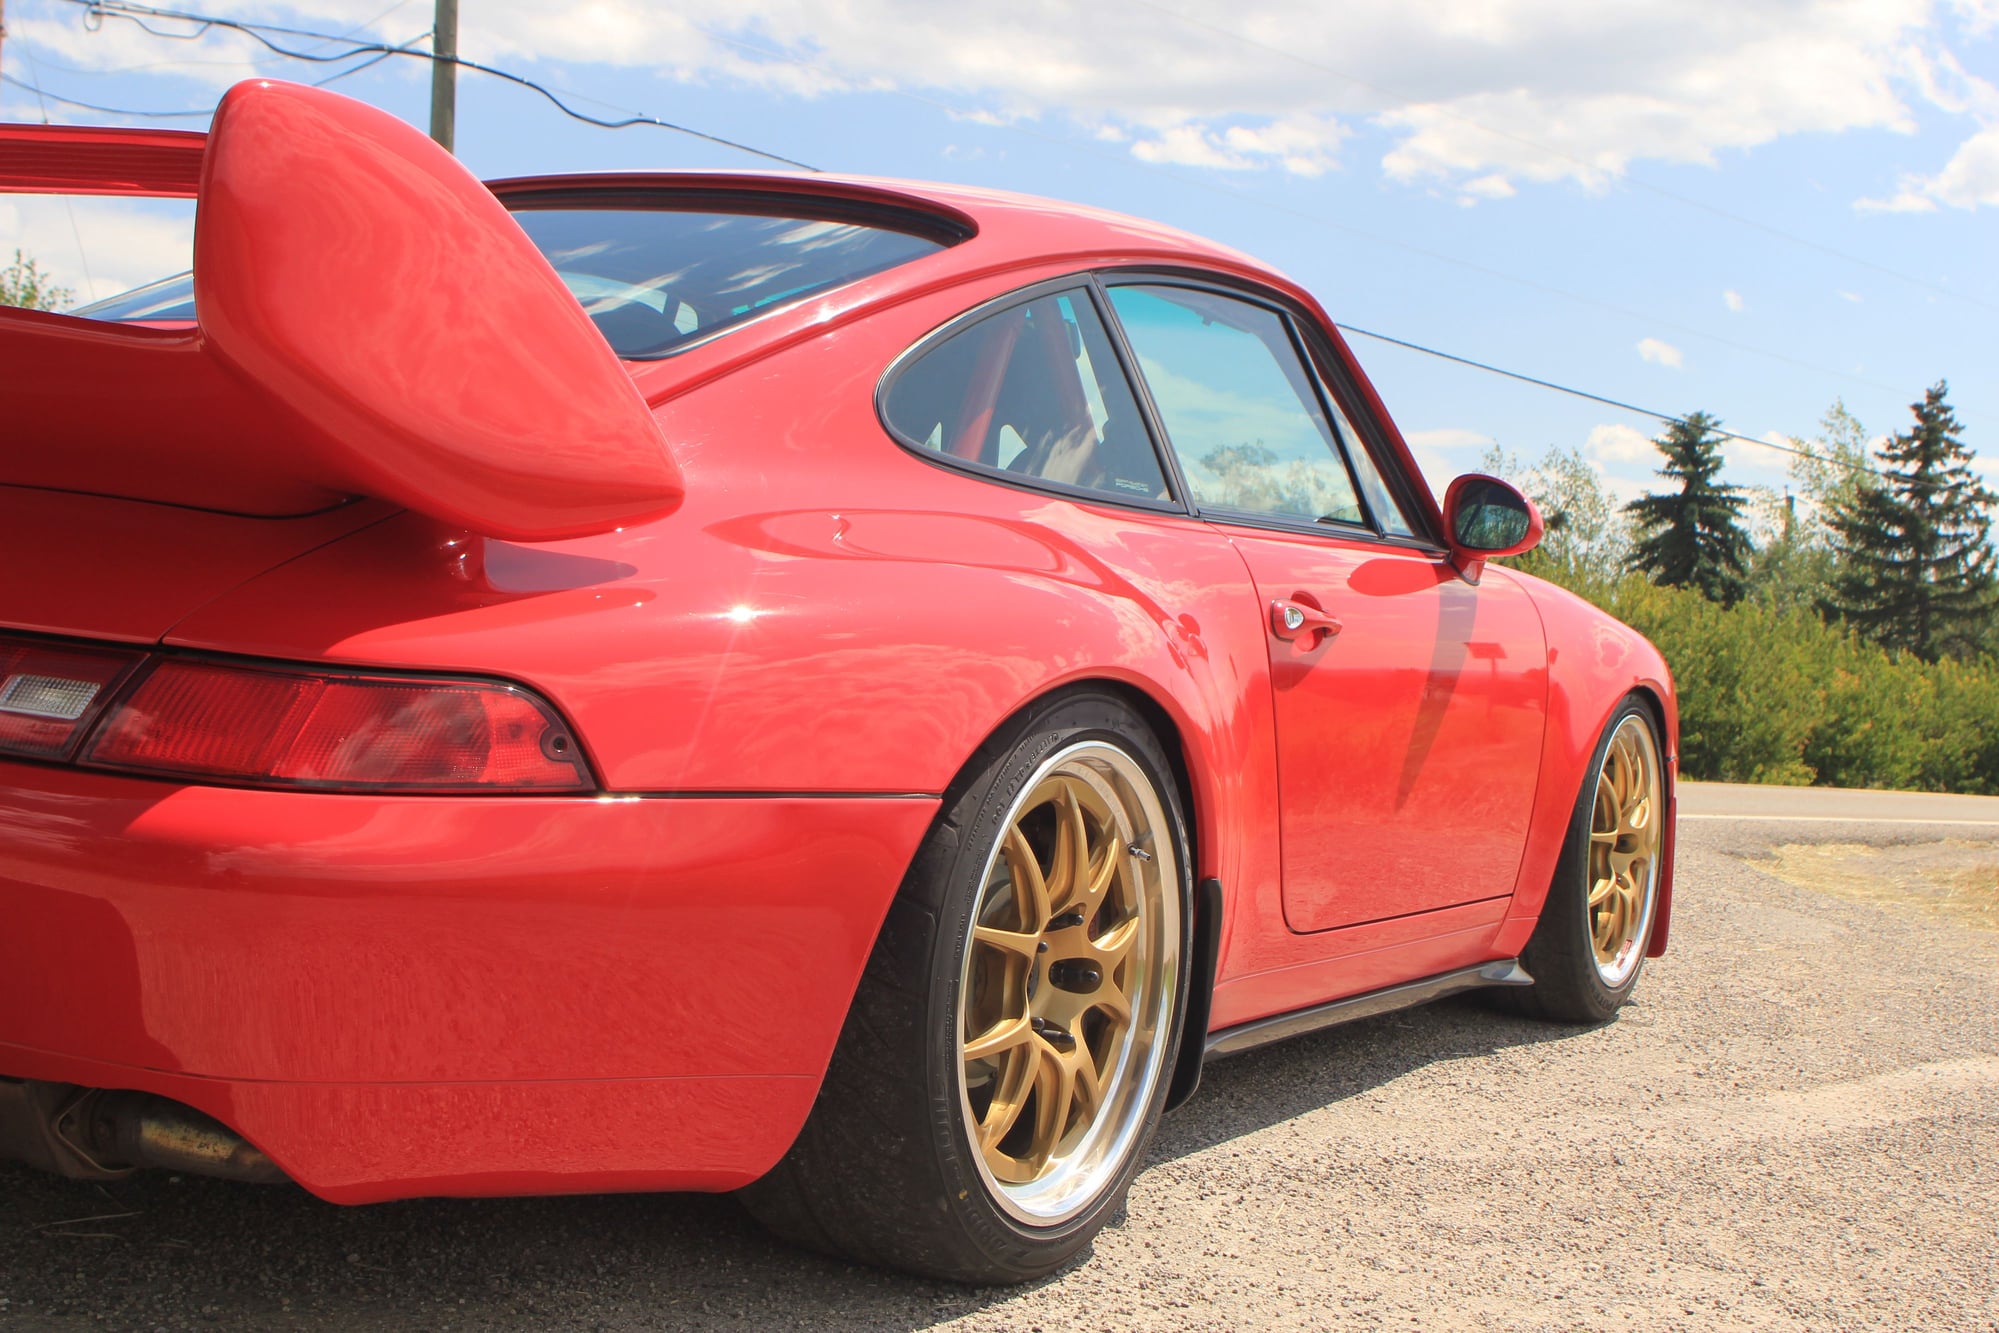 1995 Porsche 911 - 1995 993 RS 4.0 For Sale - Used - VIN WPOAA2998SS322097 - 77,100 Miles - 6 cyl - 2WD - Manual - Coupe - Red - Calgary, AB T3Z3T9, Canada